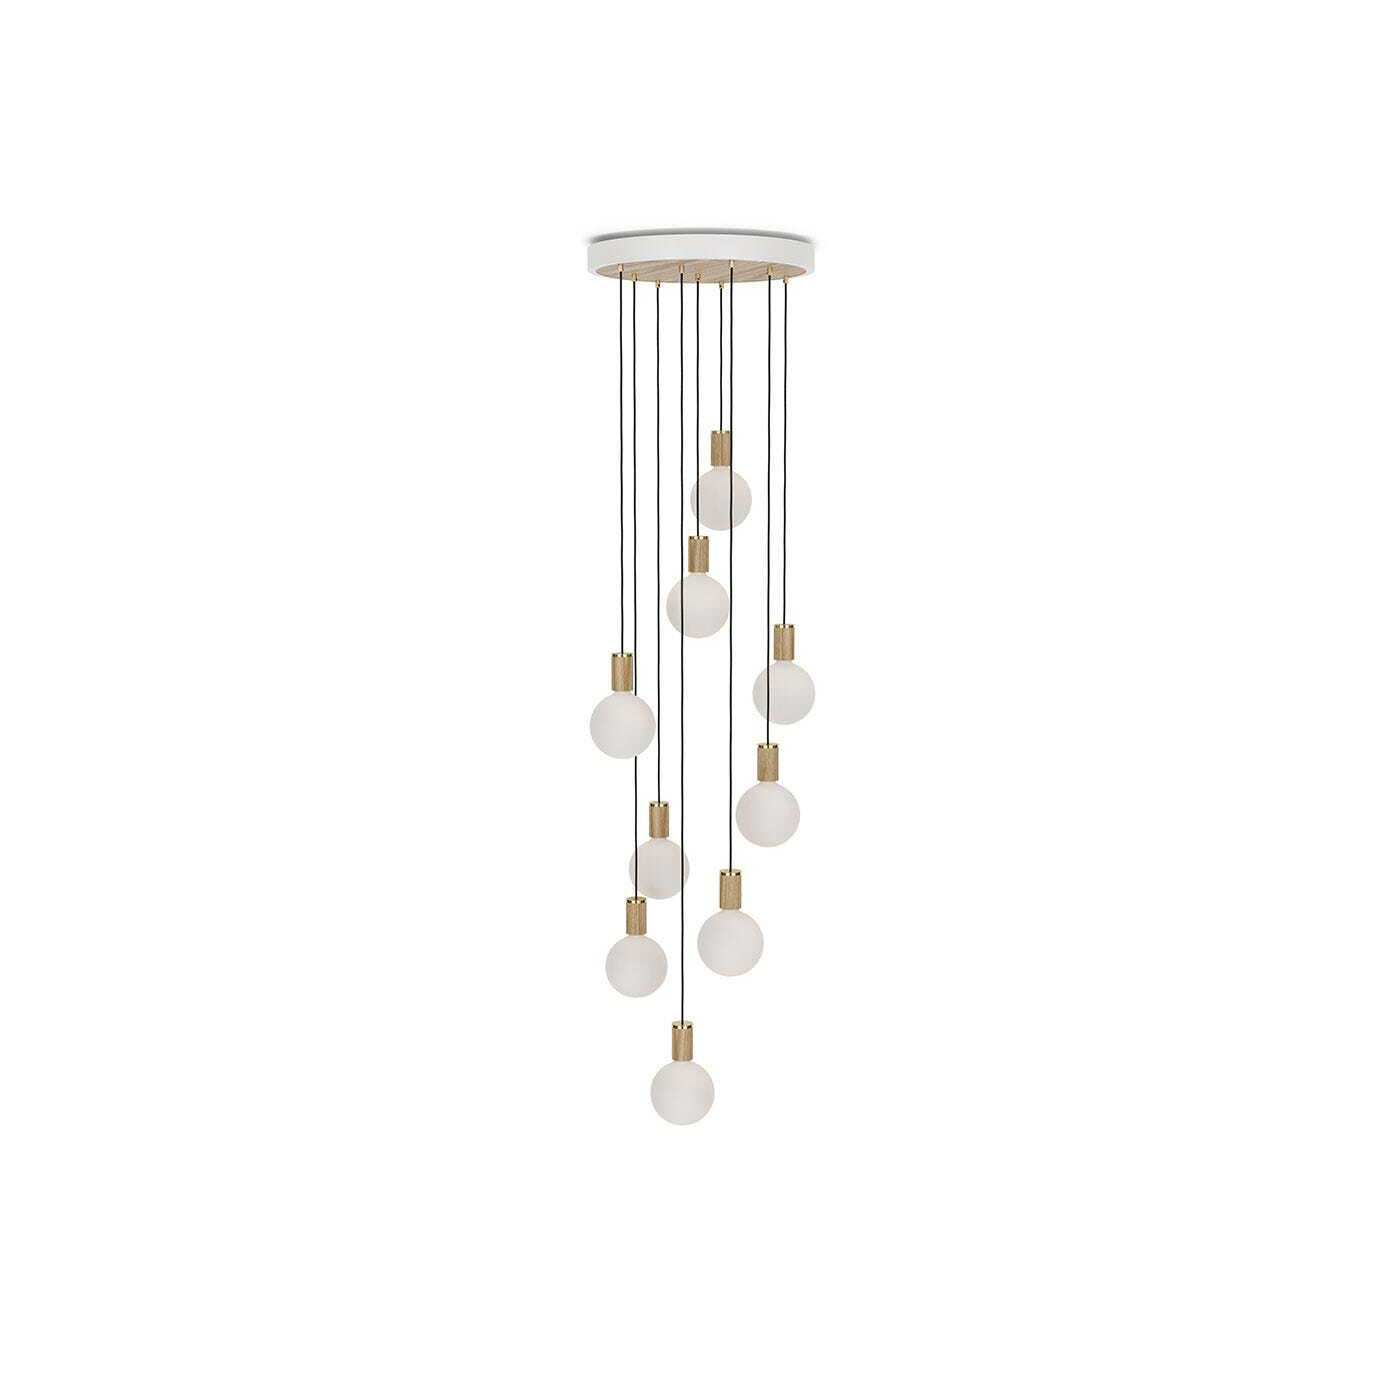 Tala Large White Canopy With 9 Oak Pendants and 9 Sphere IV Bulbs - image 1